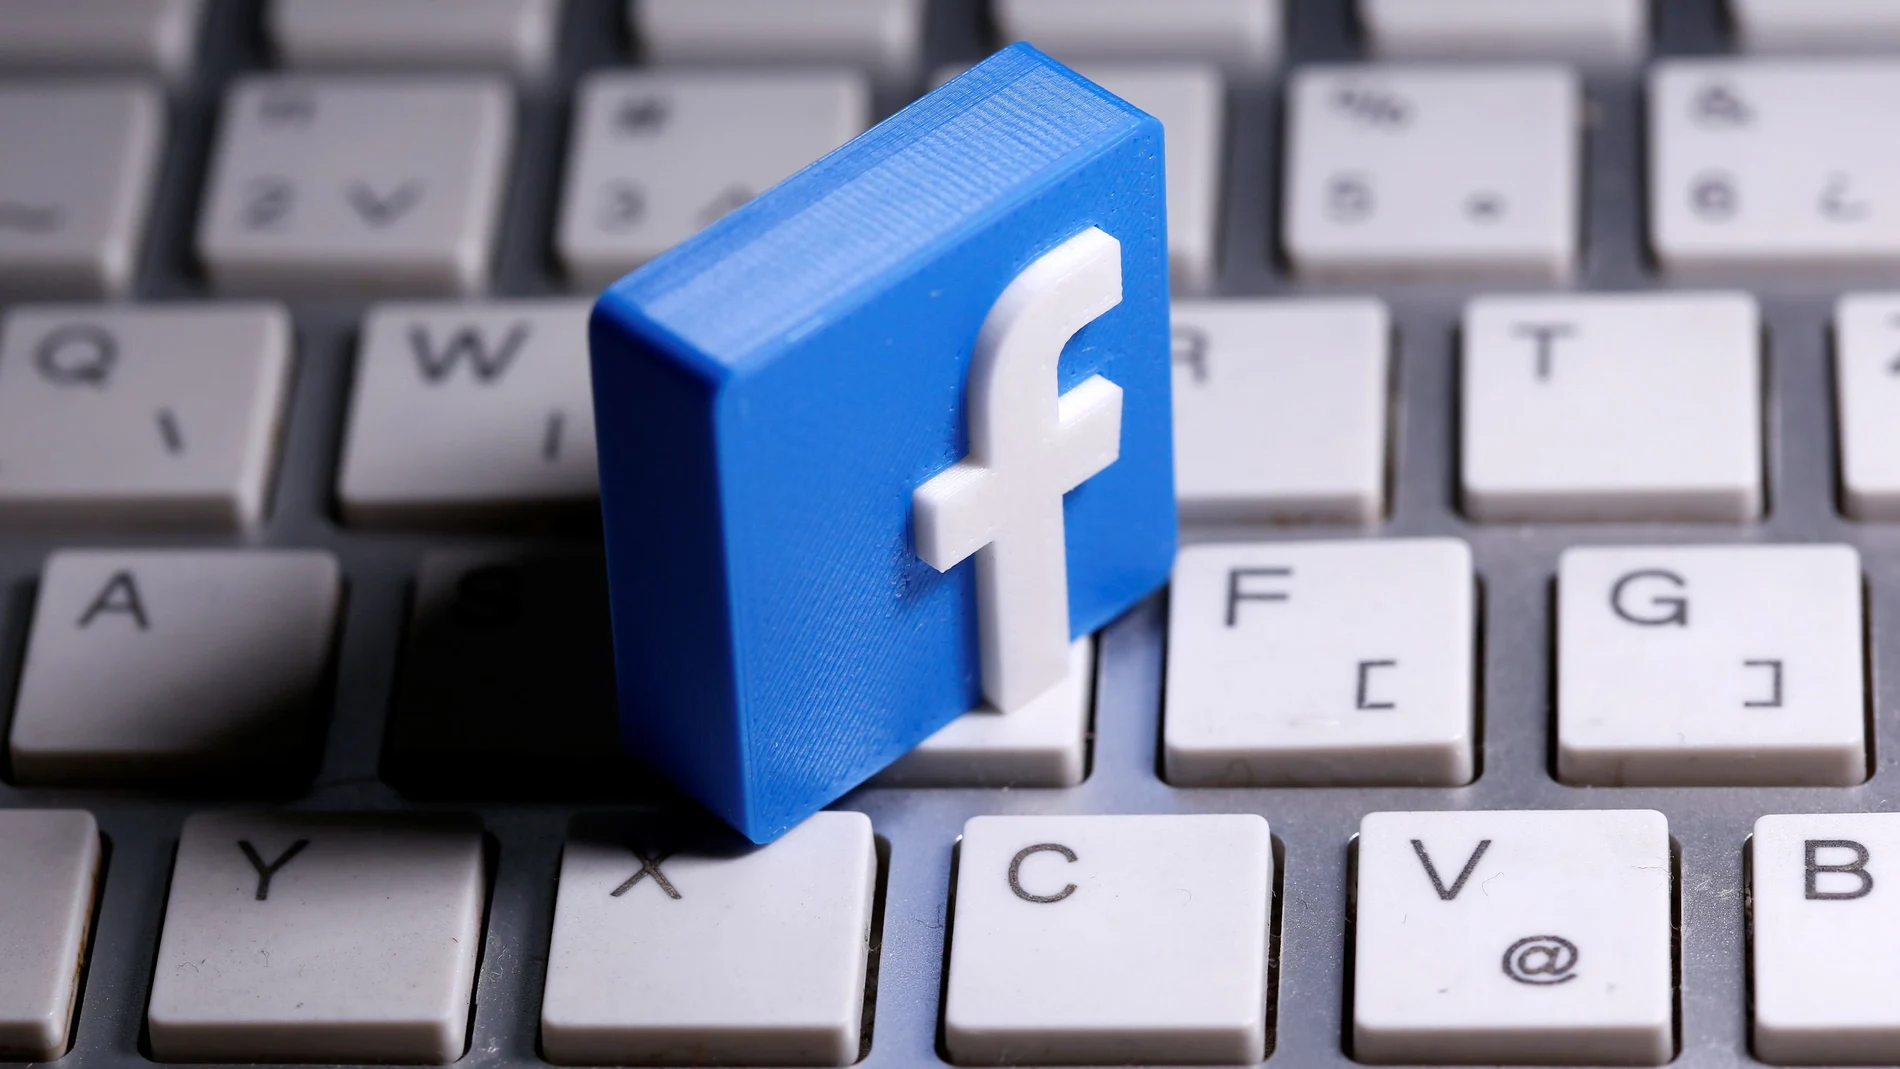 A 3D-printed Facebook logo is seen placed on a keyboard in this illustration